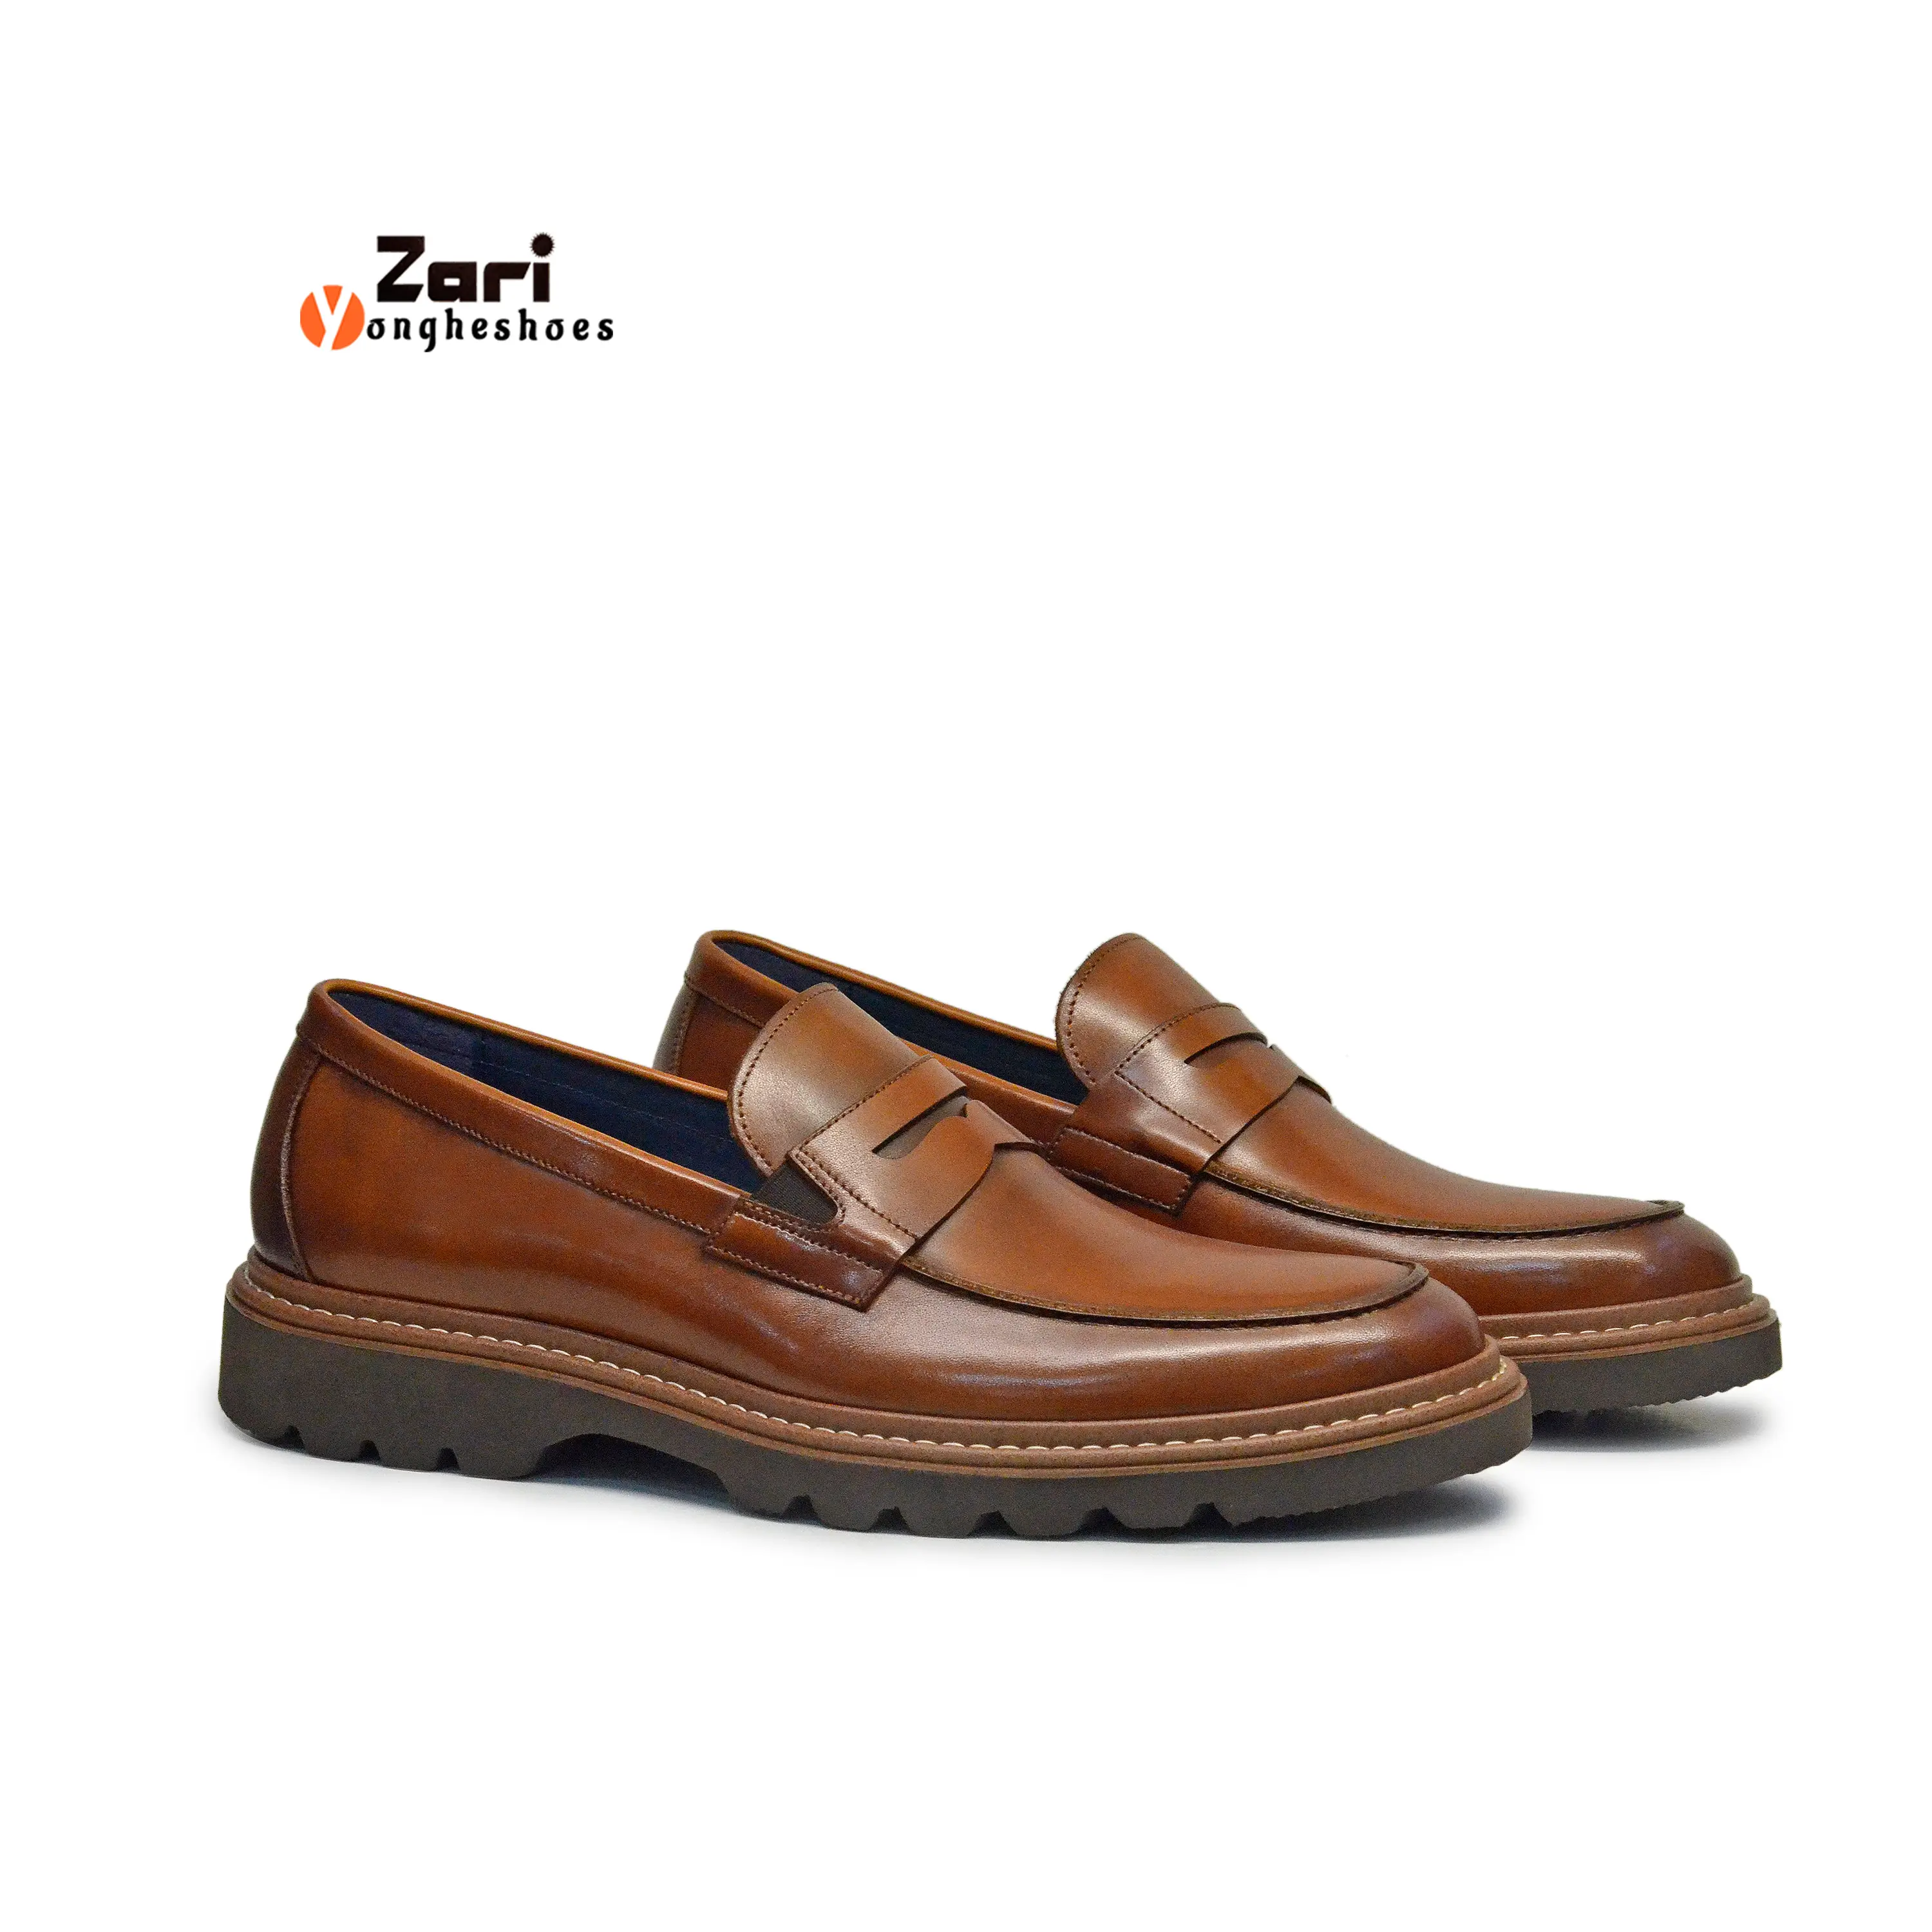 Men's penny loafers